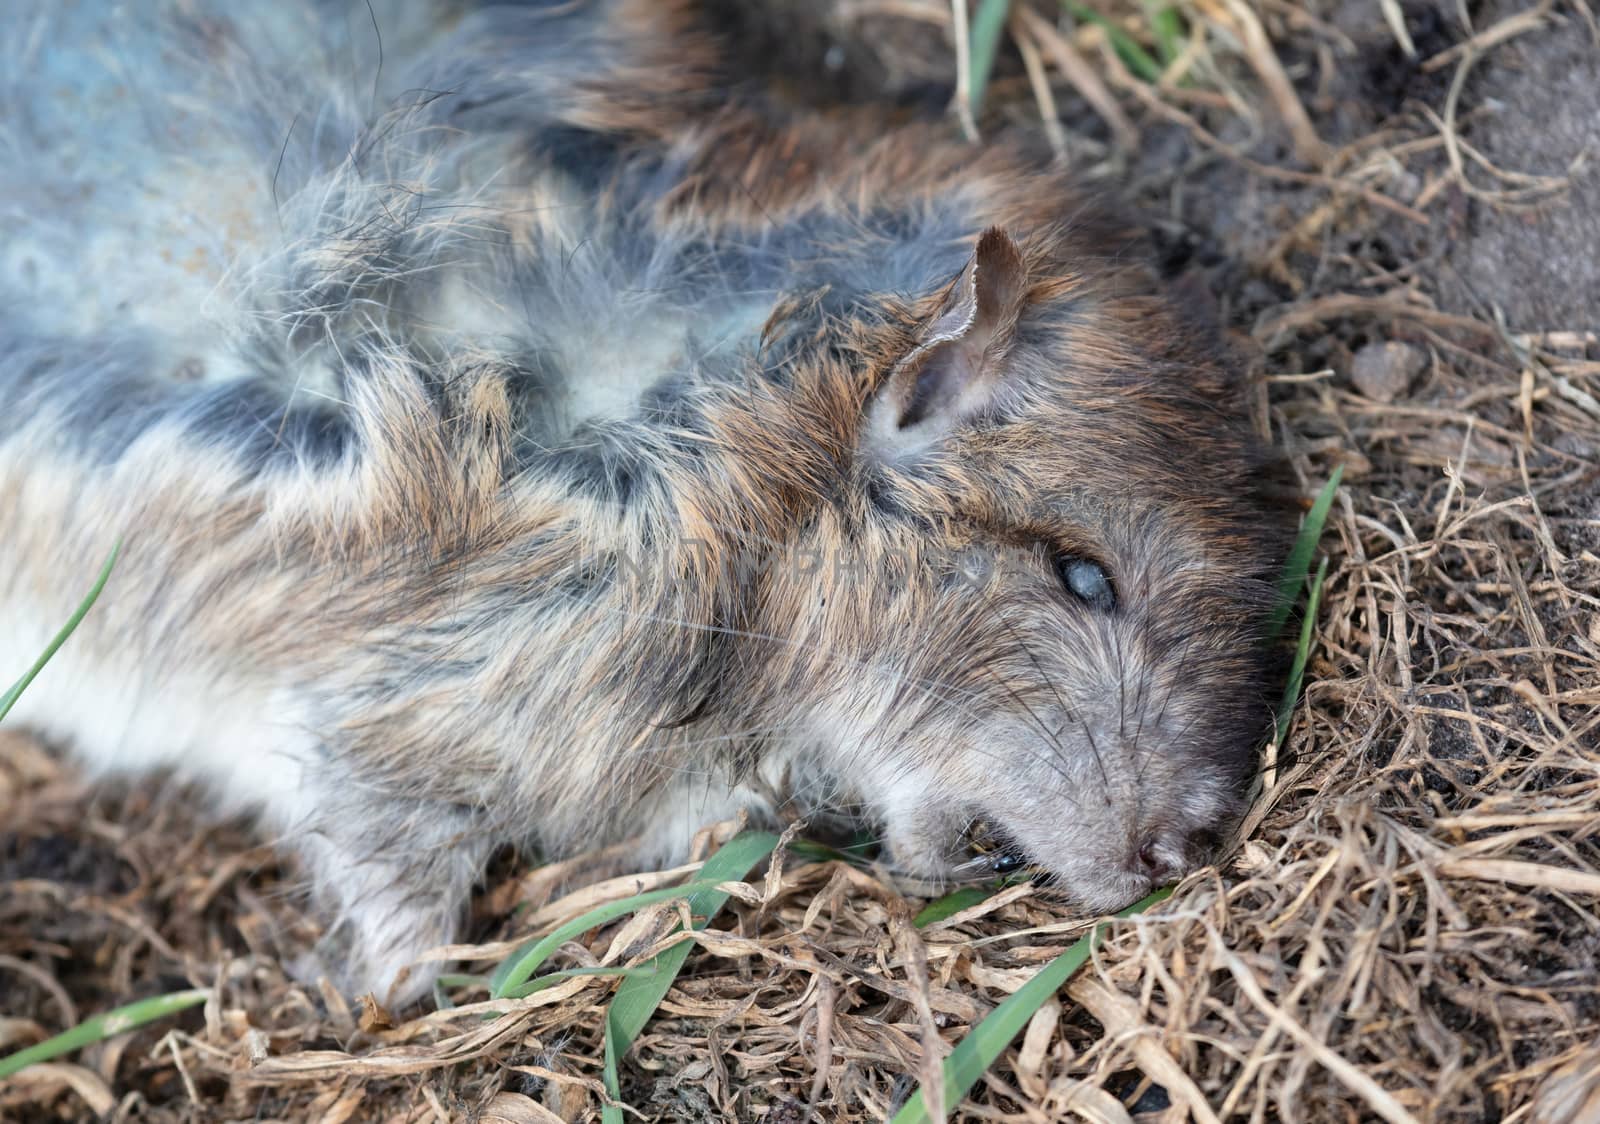 Dead muskrat lying in the grass, the Netherlands